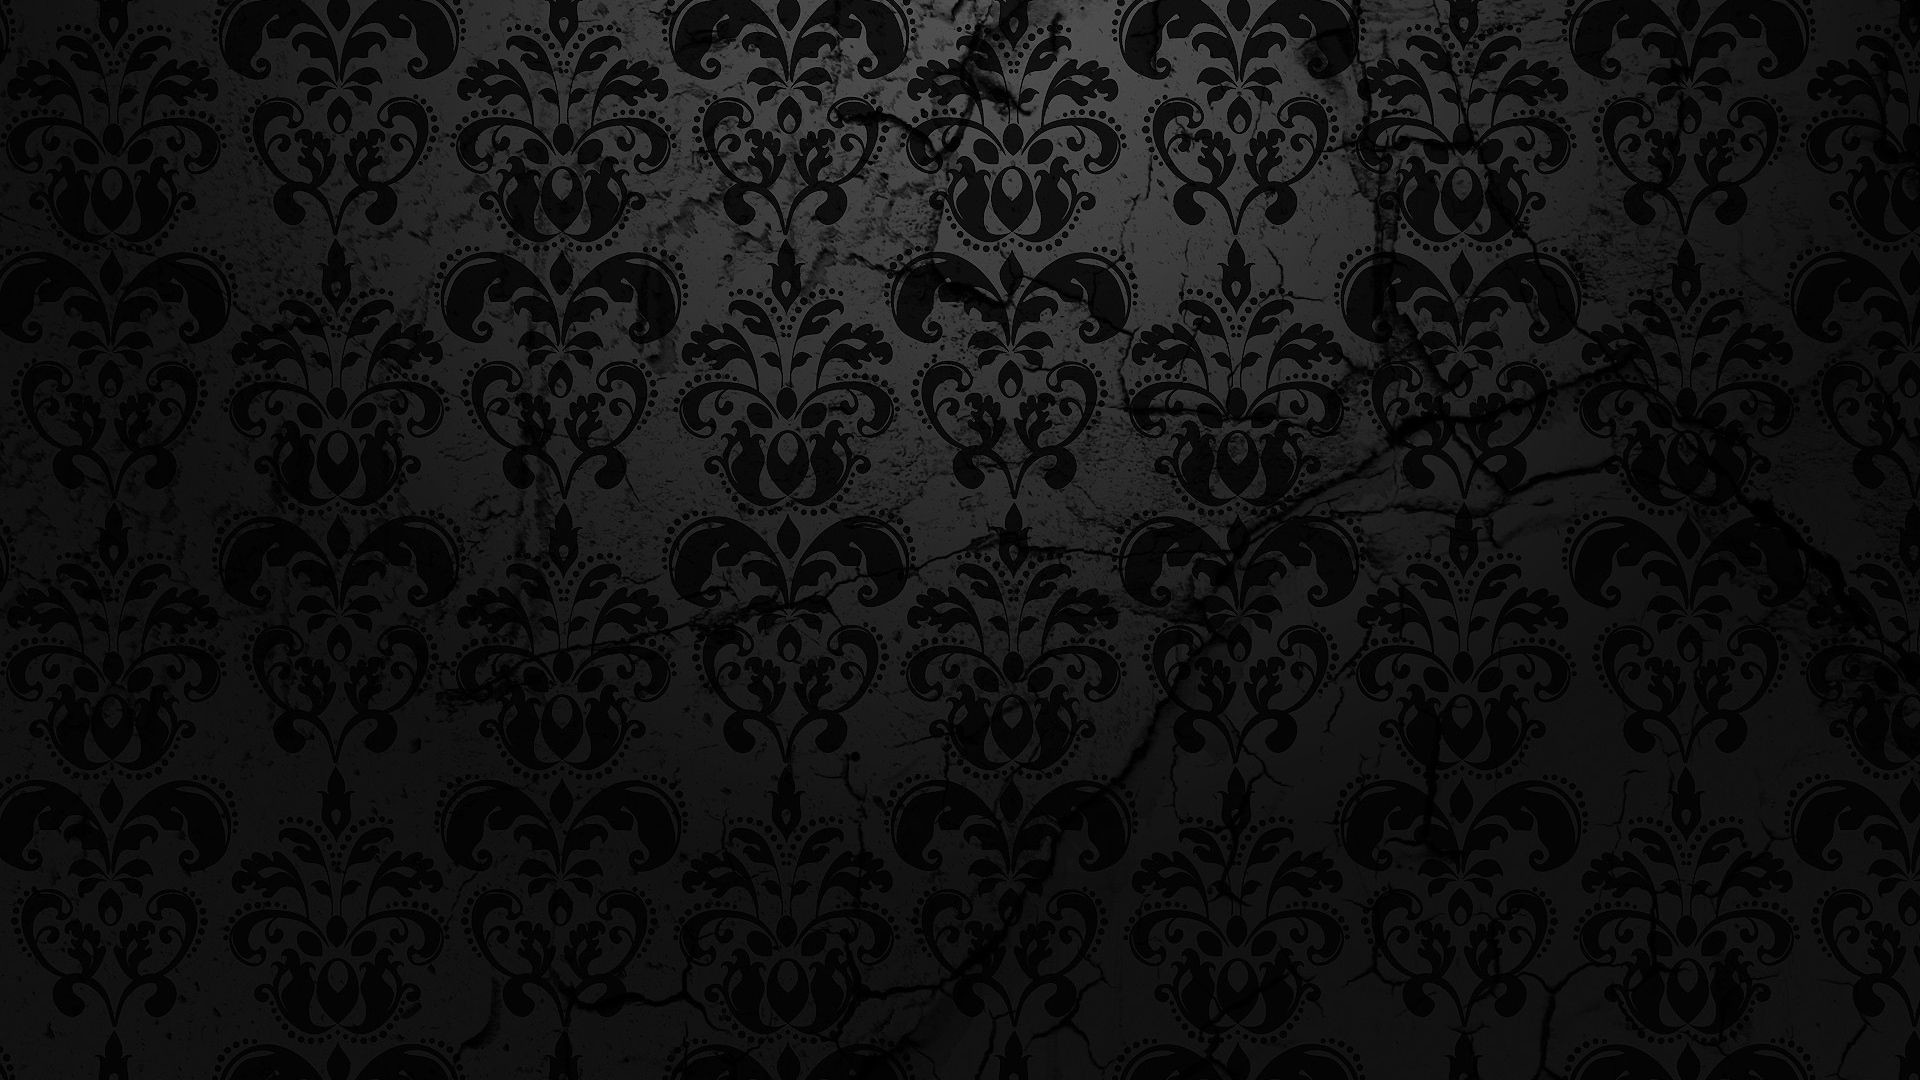 1920x1080 Cool Backgrounds, Black and White, Monochrome, Darkness, Black Textured  Wallpaper in 